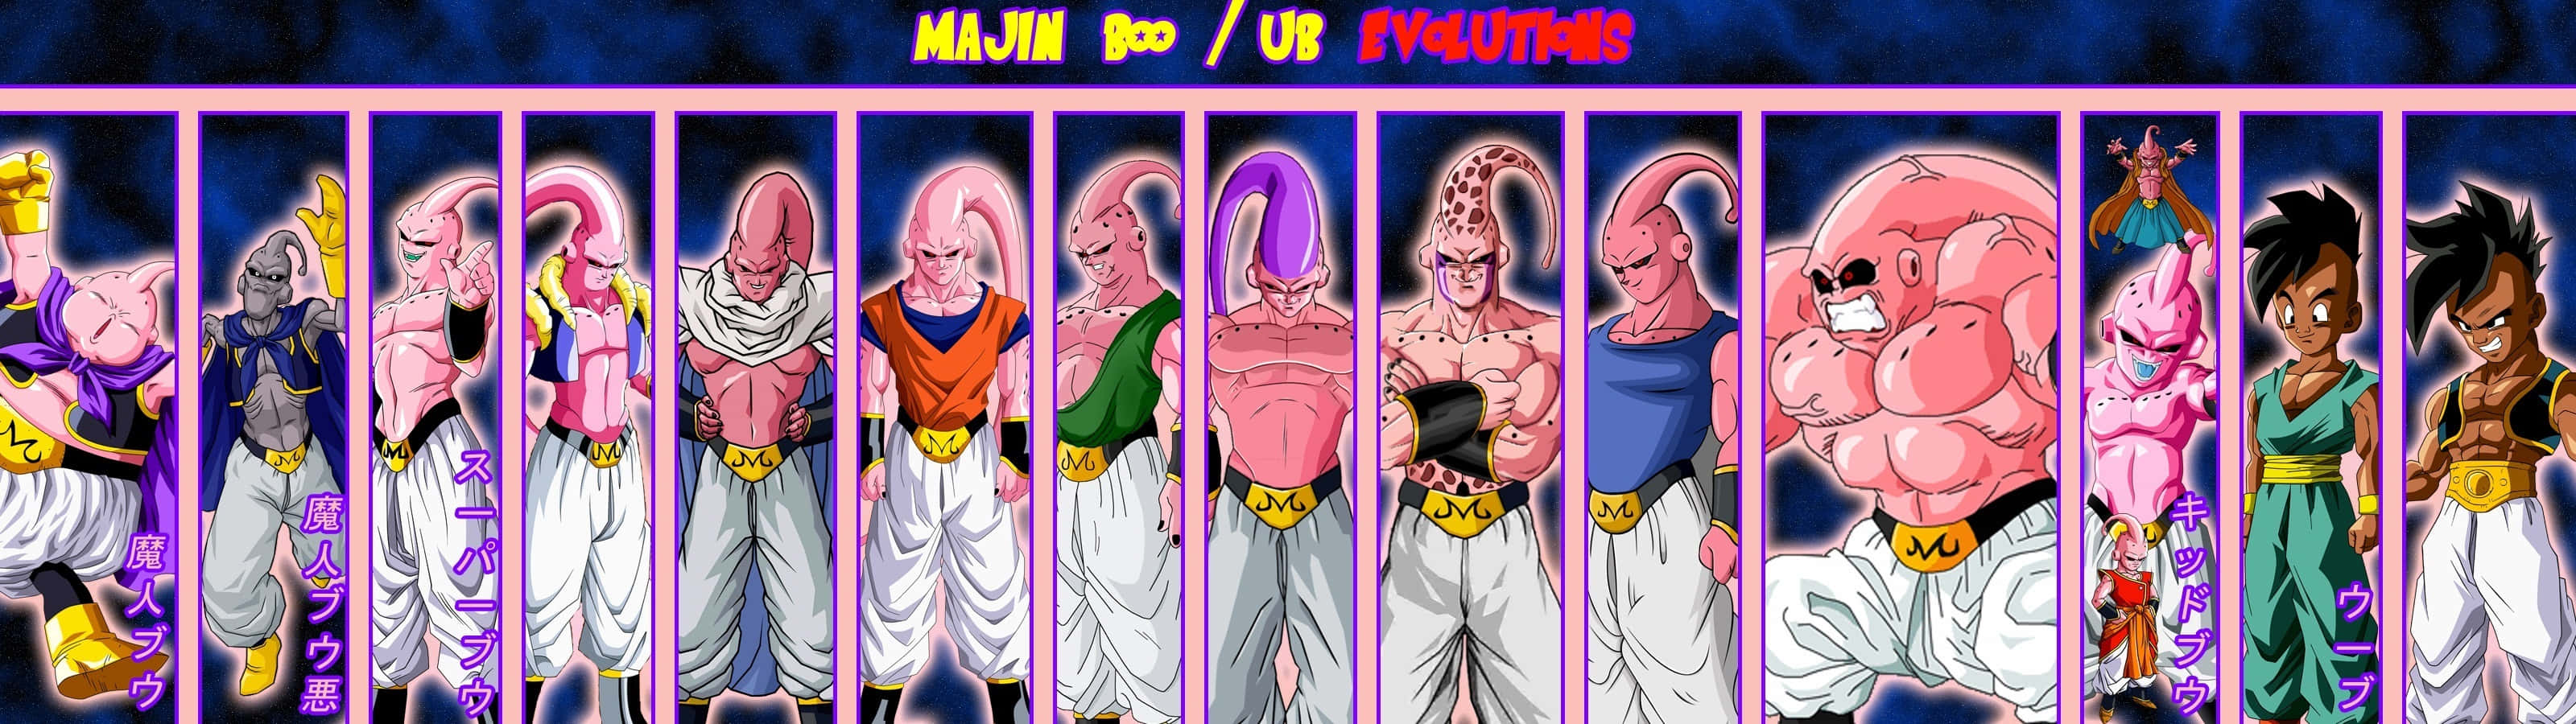 A captivating image of Buu, the iconic character from Dragon Ball Z series. Wallpaper